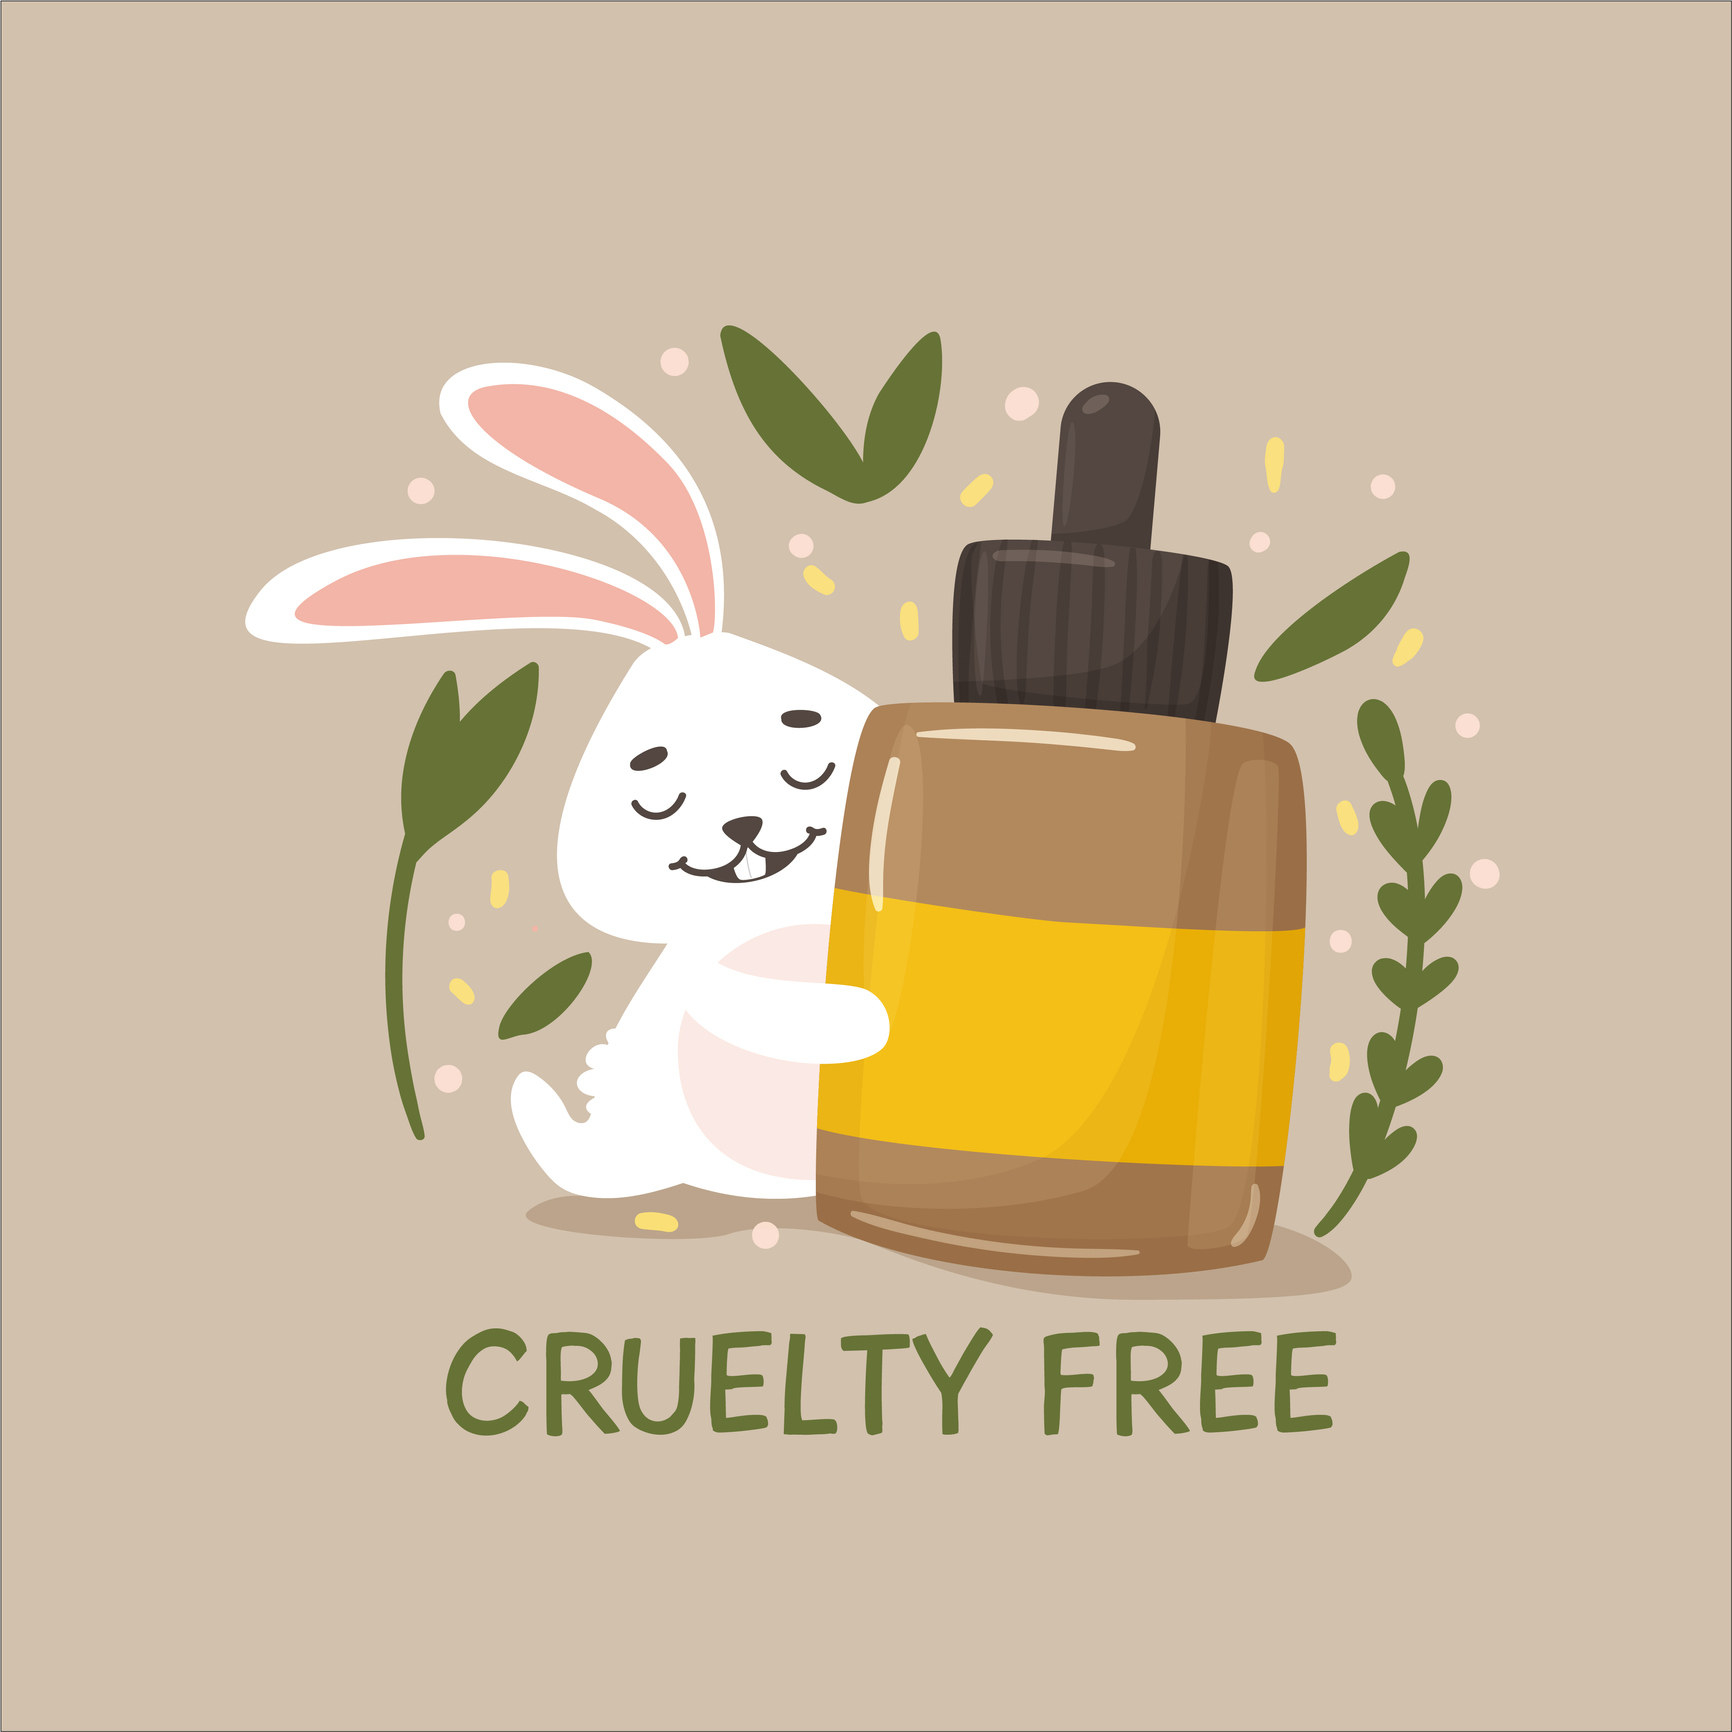 illustration of a bunny holding a bottle with the words that read cruelty free underneath the bottle